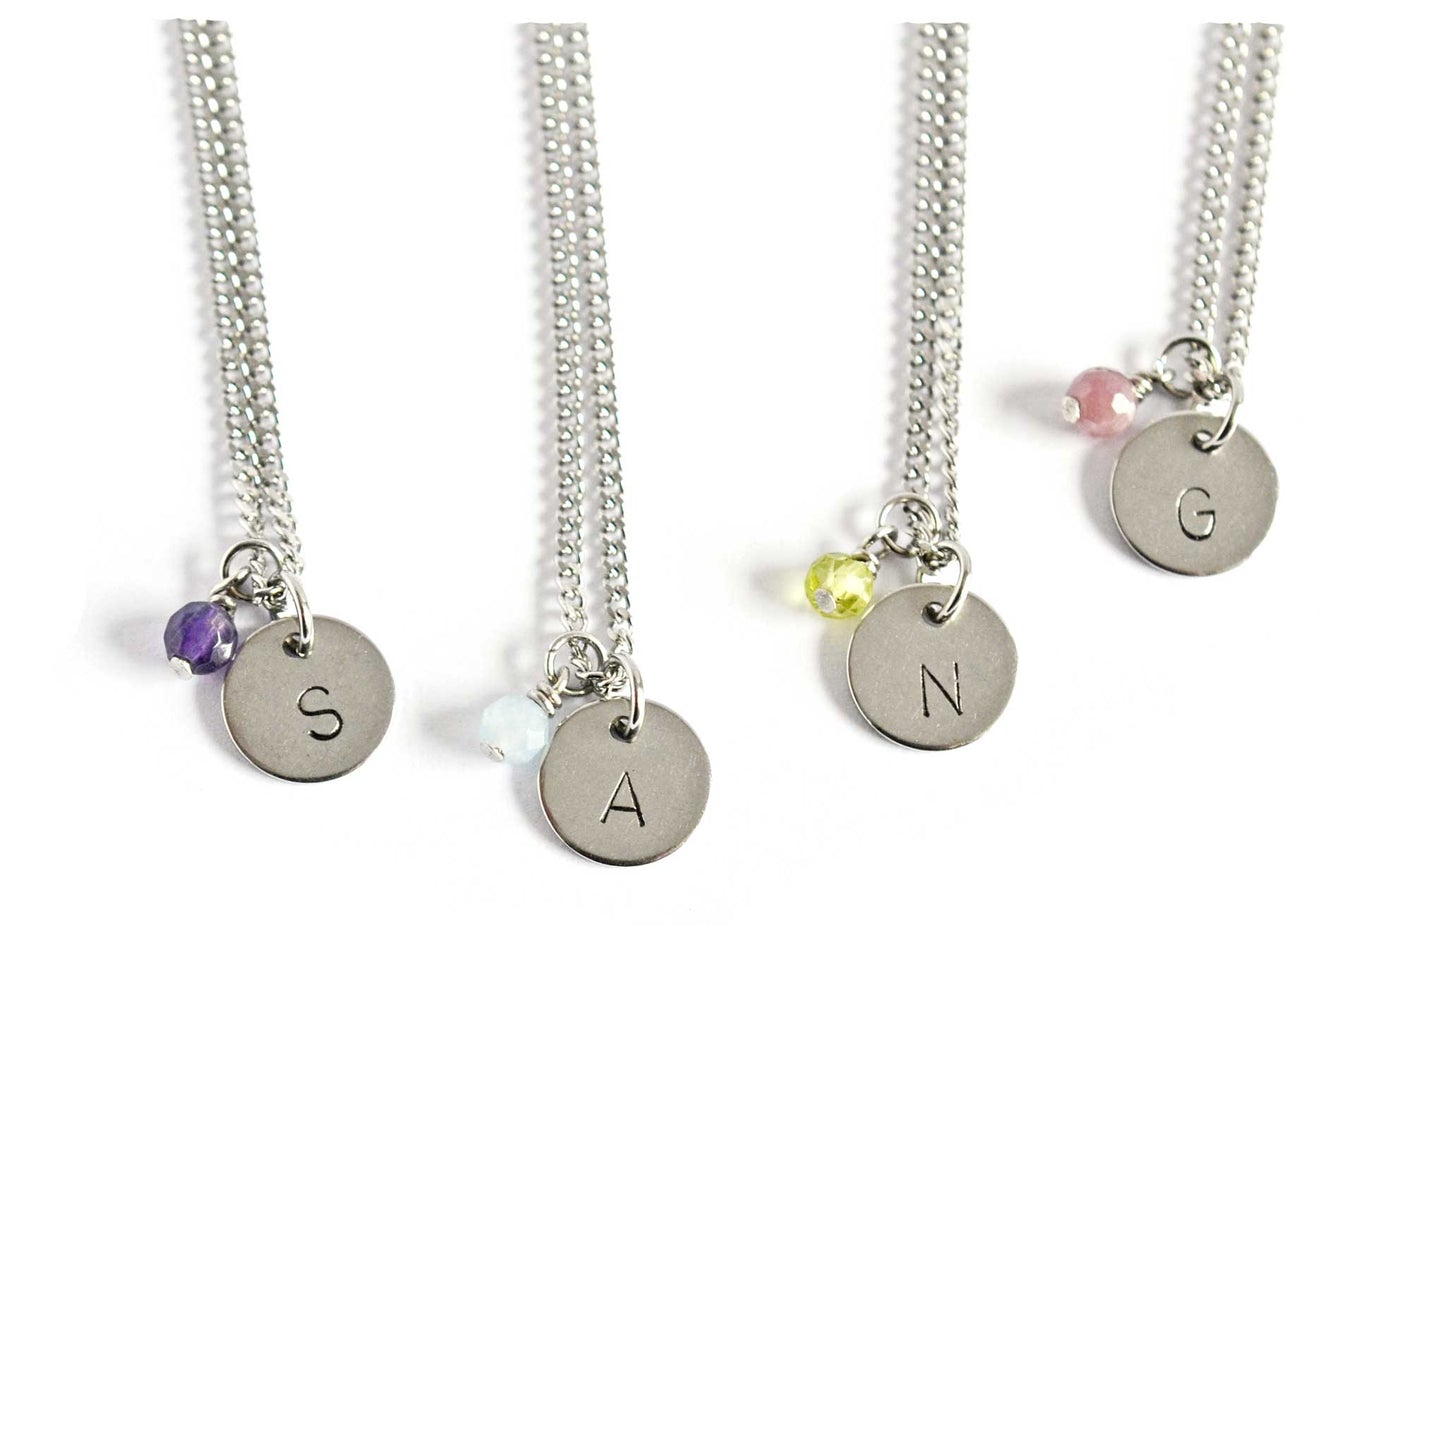 Birthstone necklaces with initial charm on white background